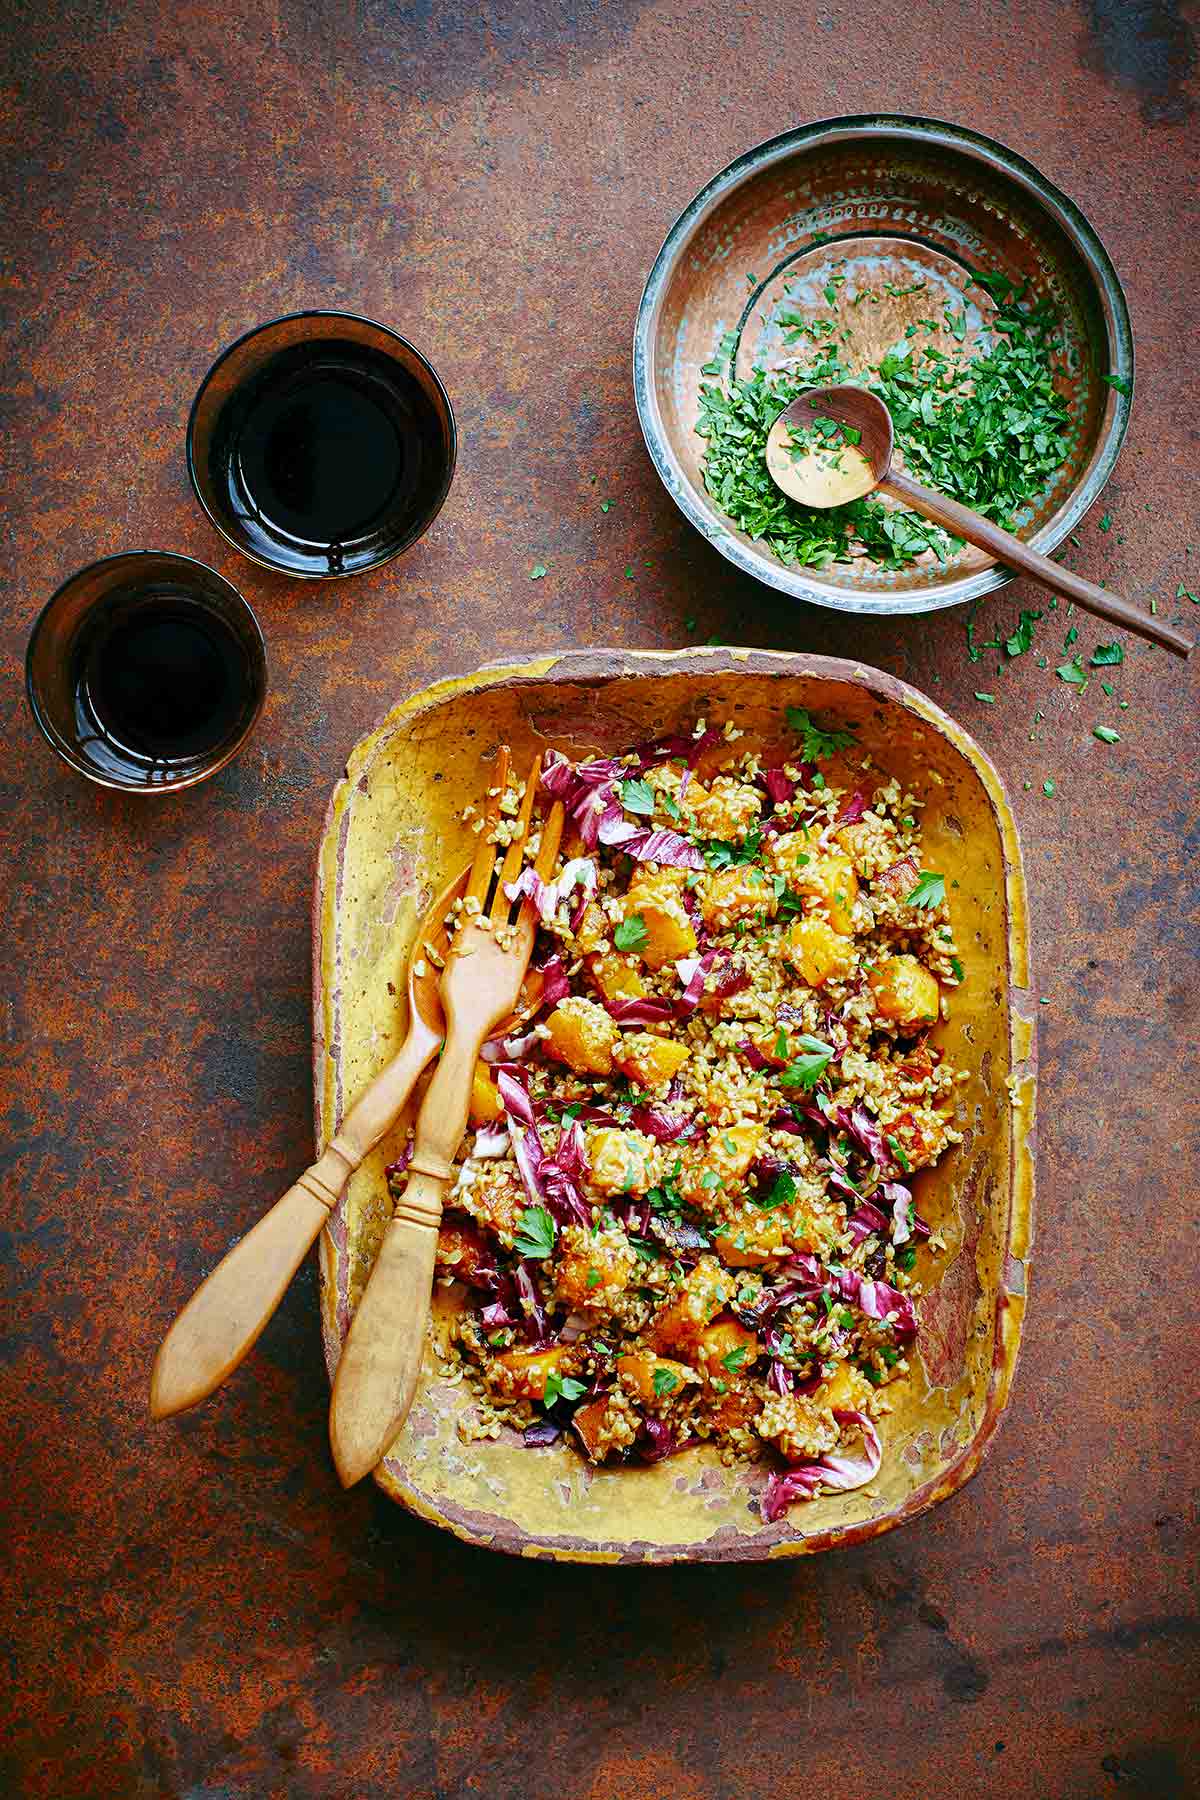 A wooden bowl with butternut squash and whole grain salad with a bowl of chopped parsley on the side and two glasses.